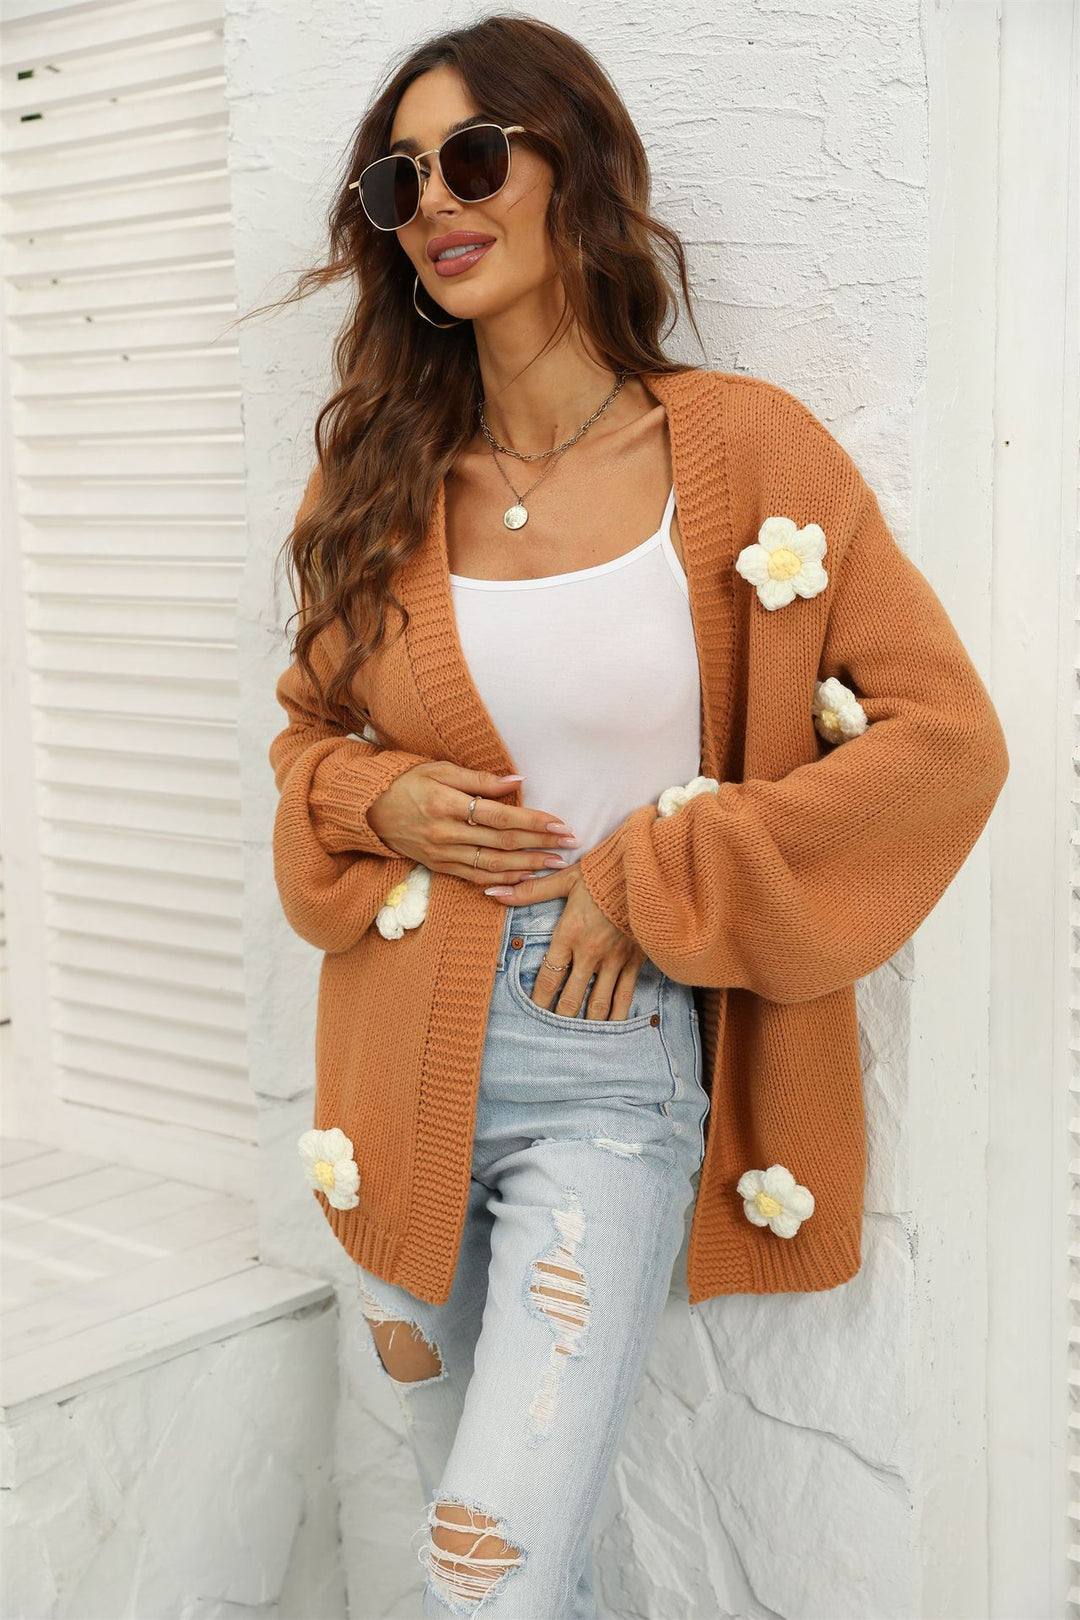 Winter Clothes Women Clothes Floral Cardigan Lantern Sleeve Sweater Coat Women